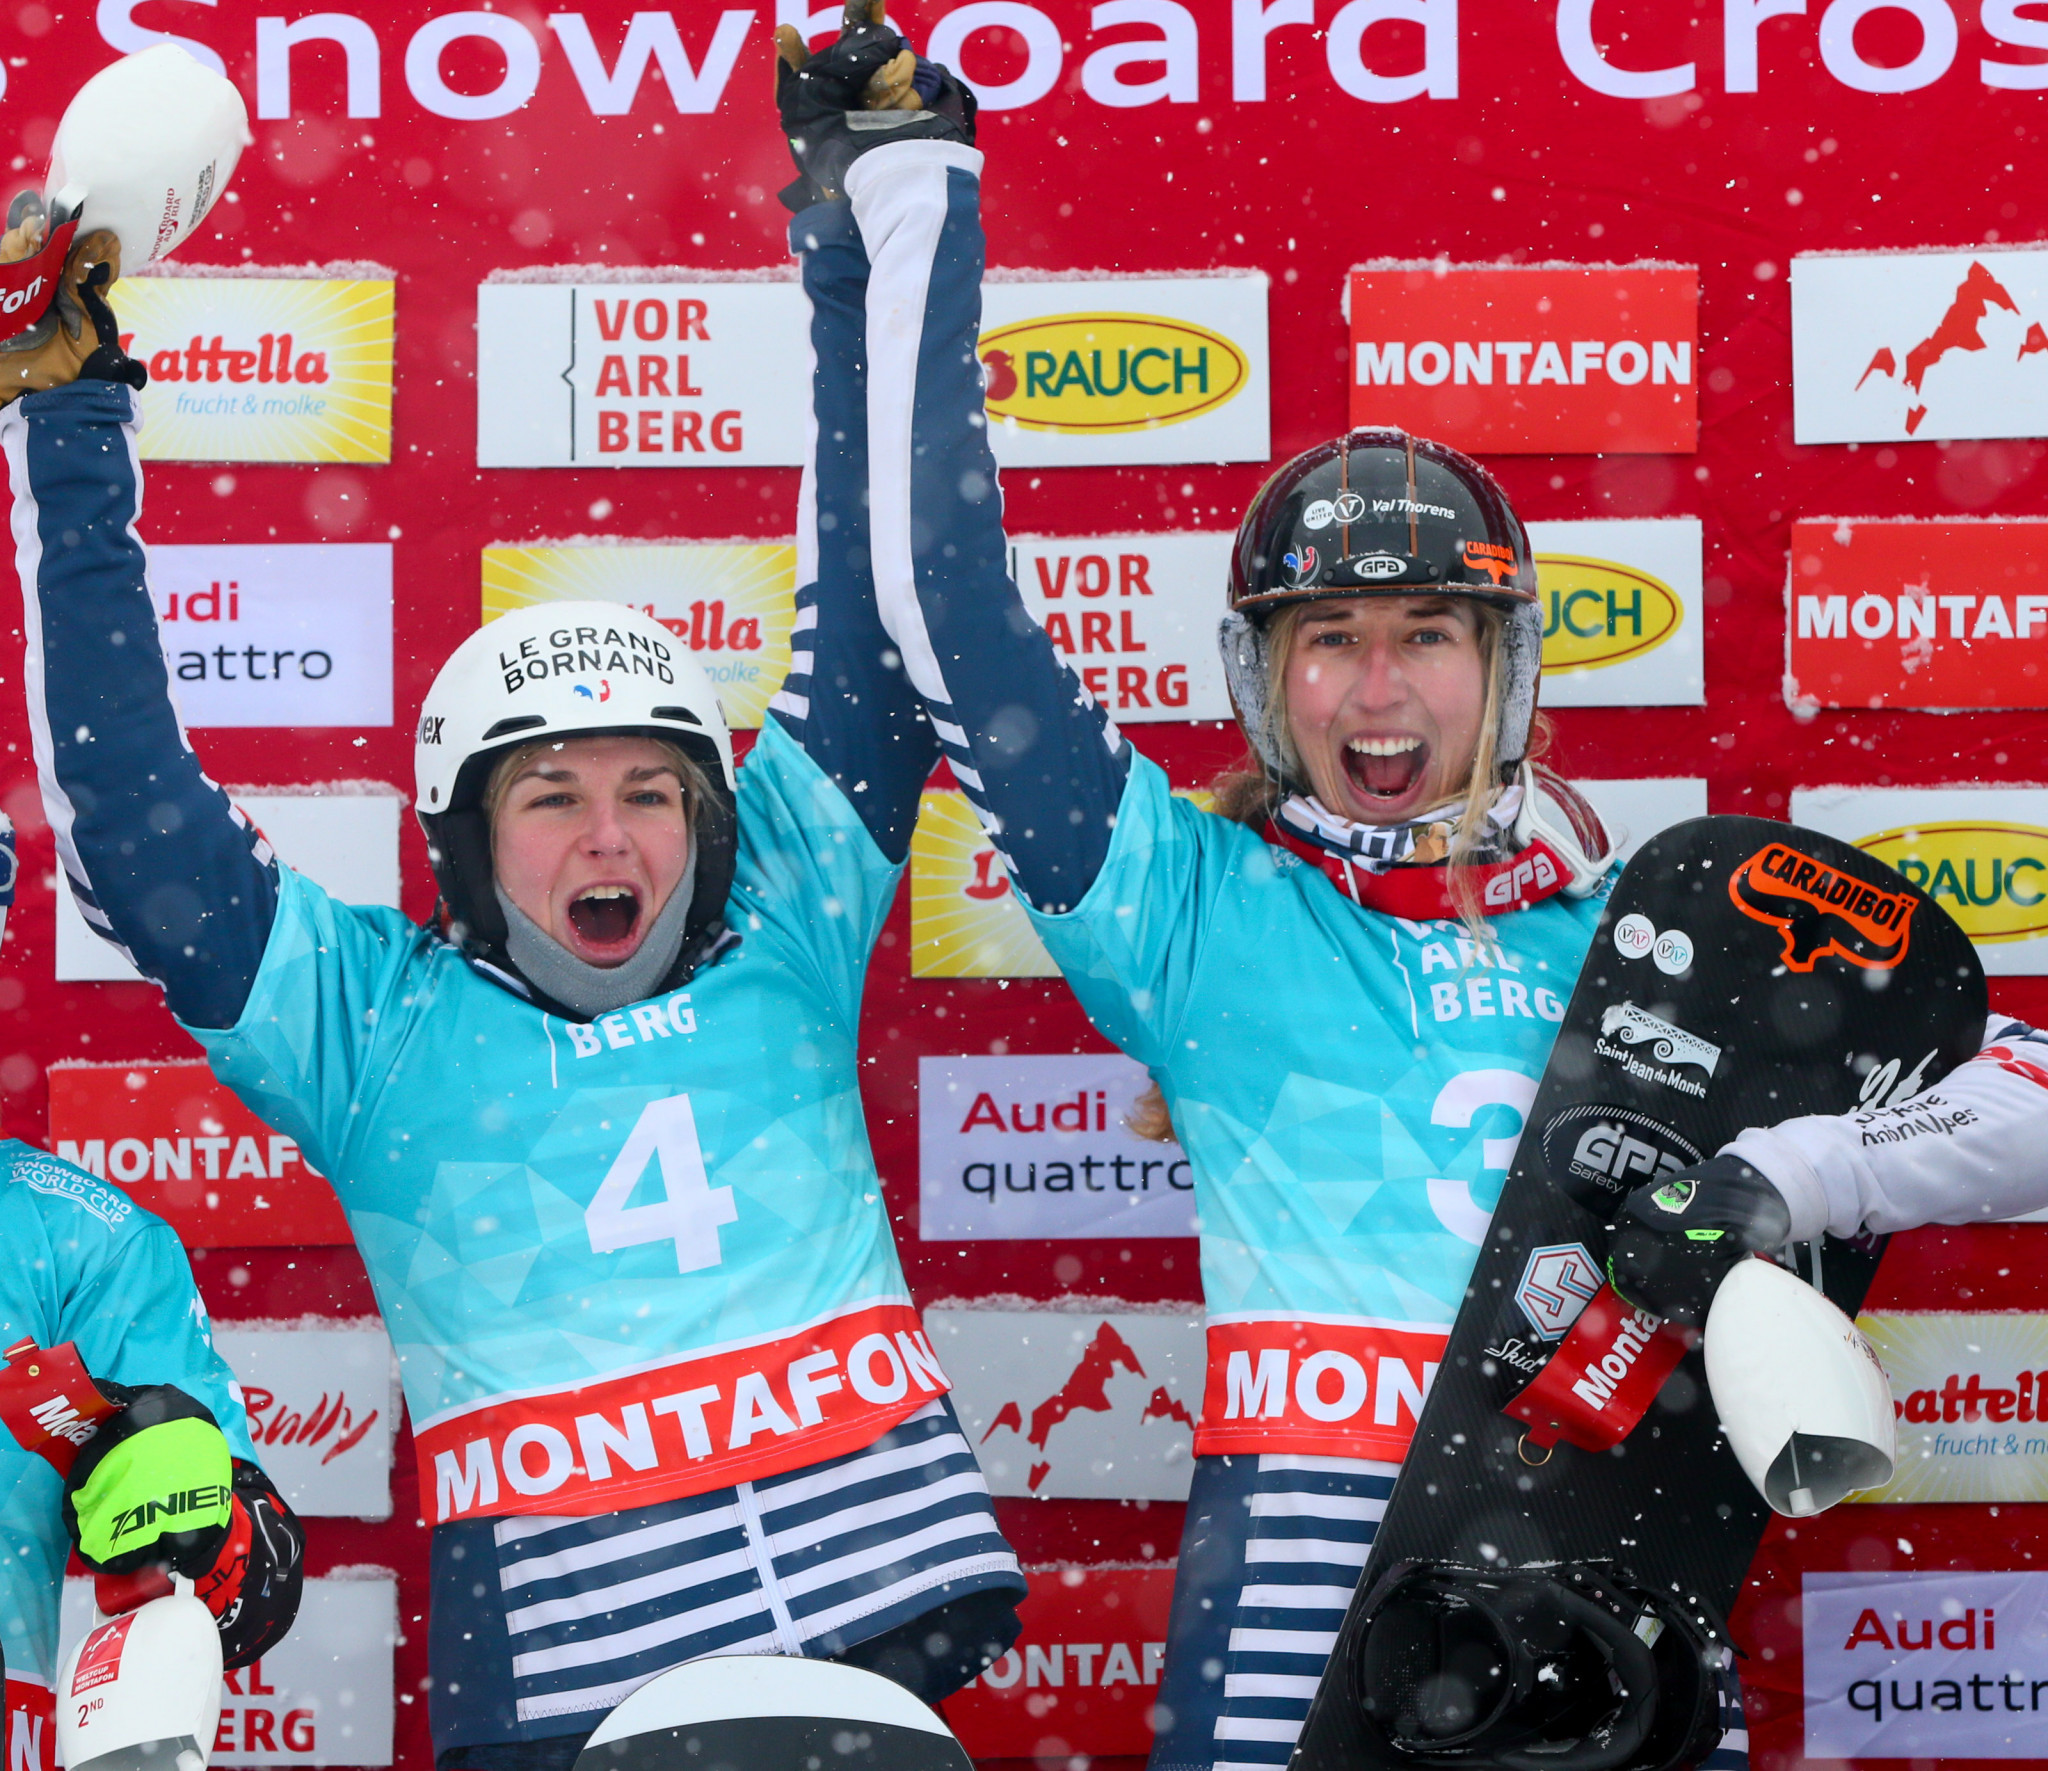 French world champions win team event at Snowboard Cross World Cup